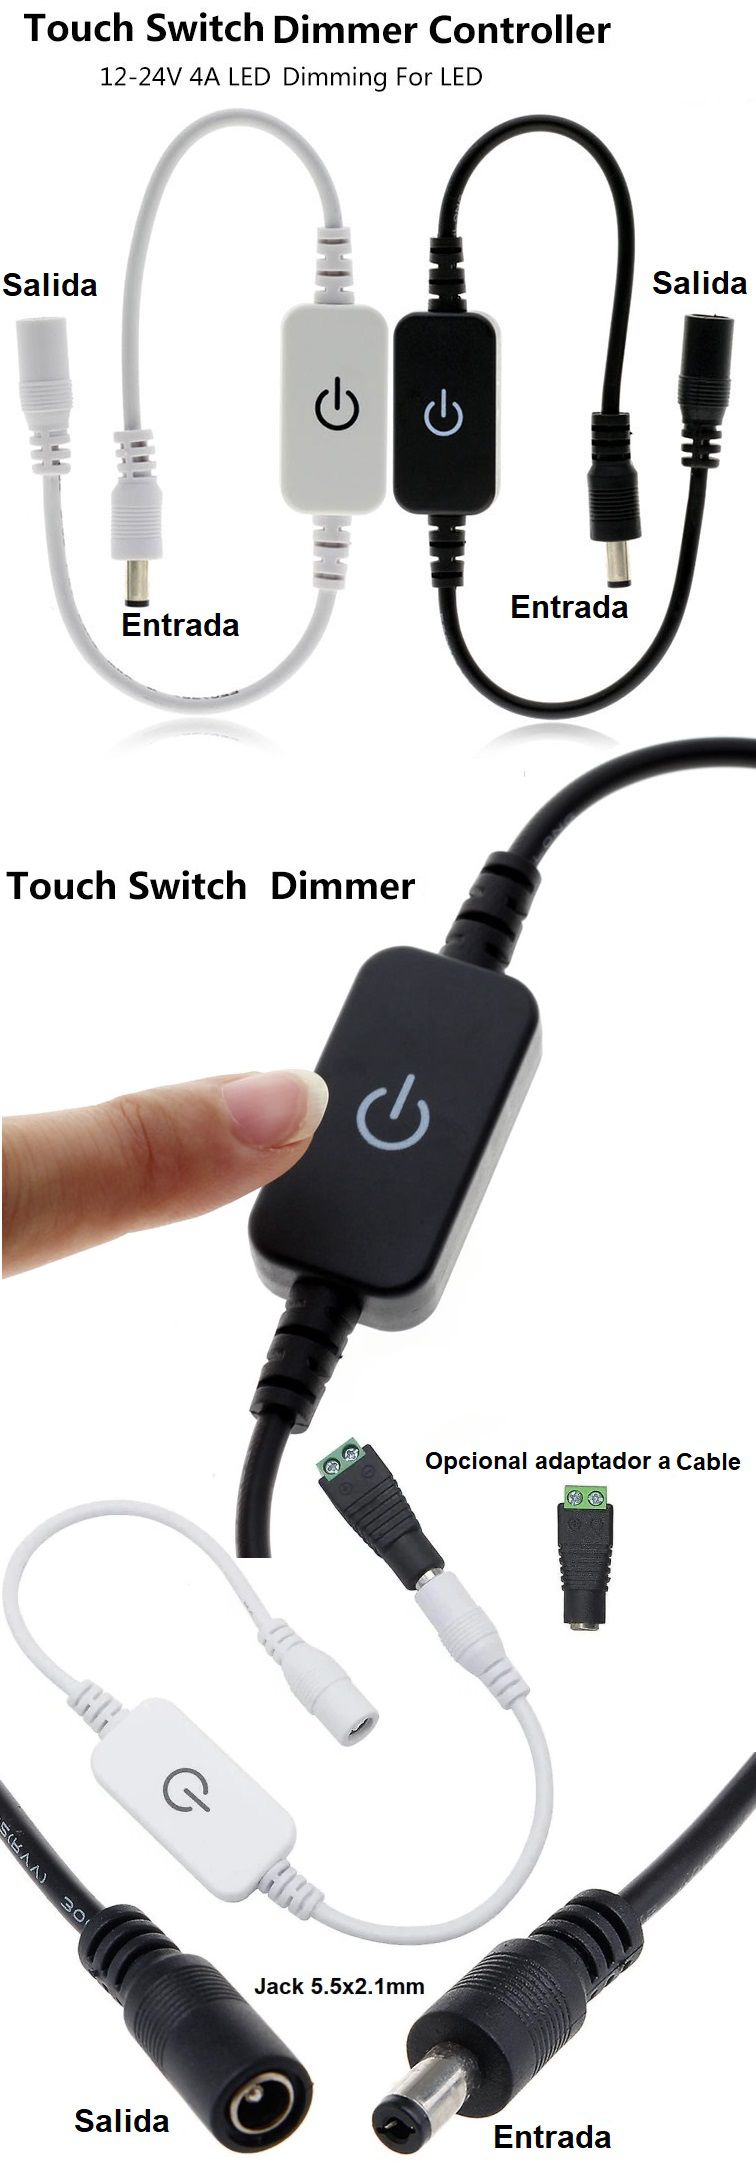 Dimmer Led touch